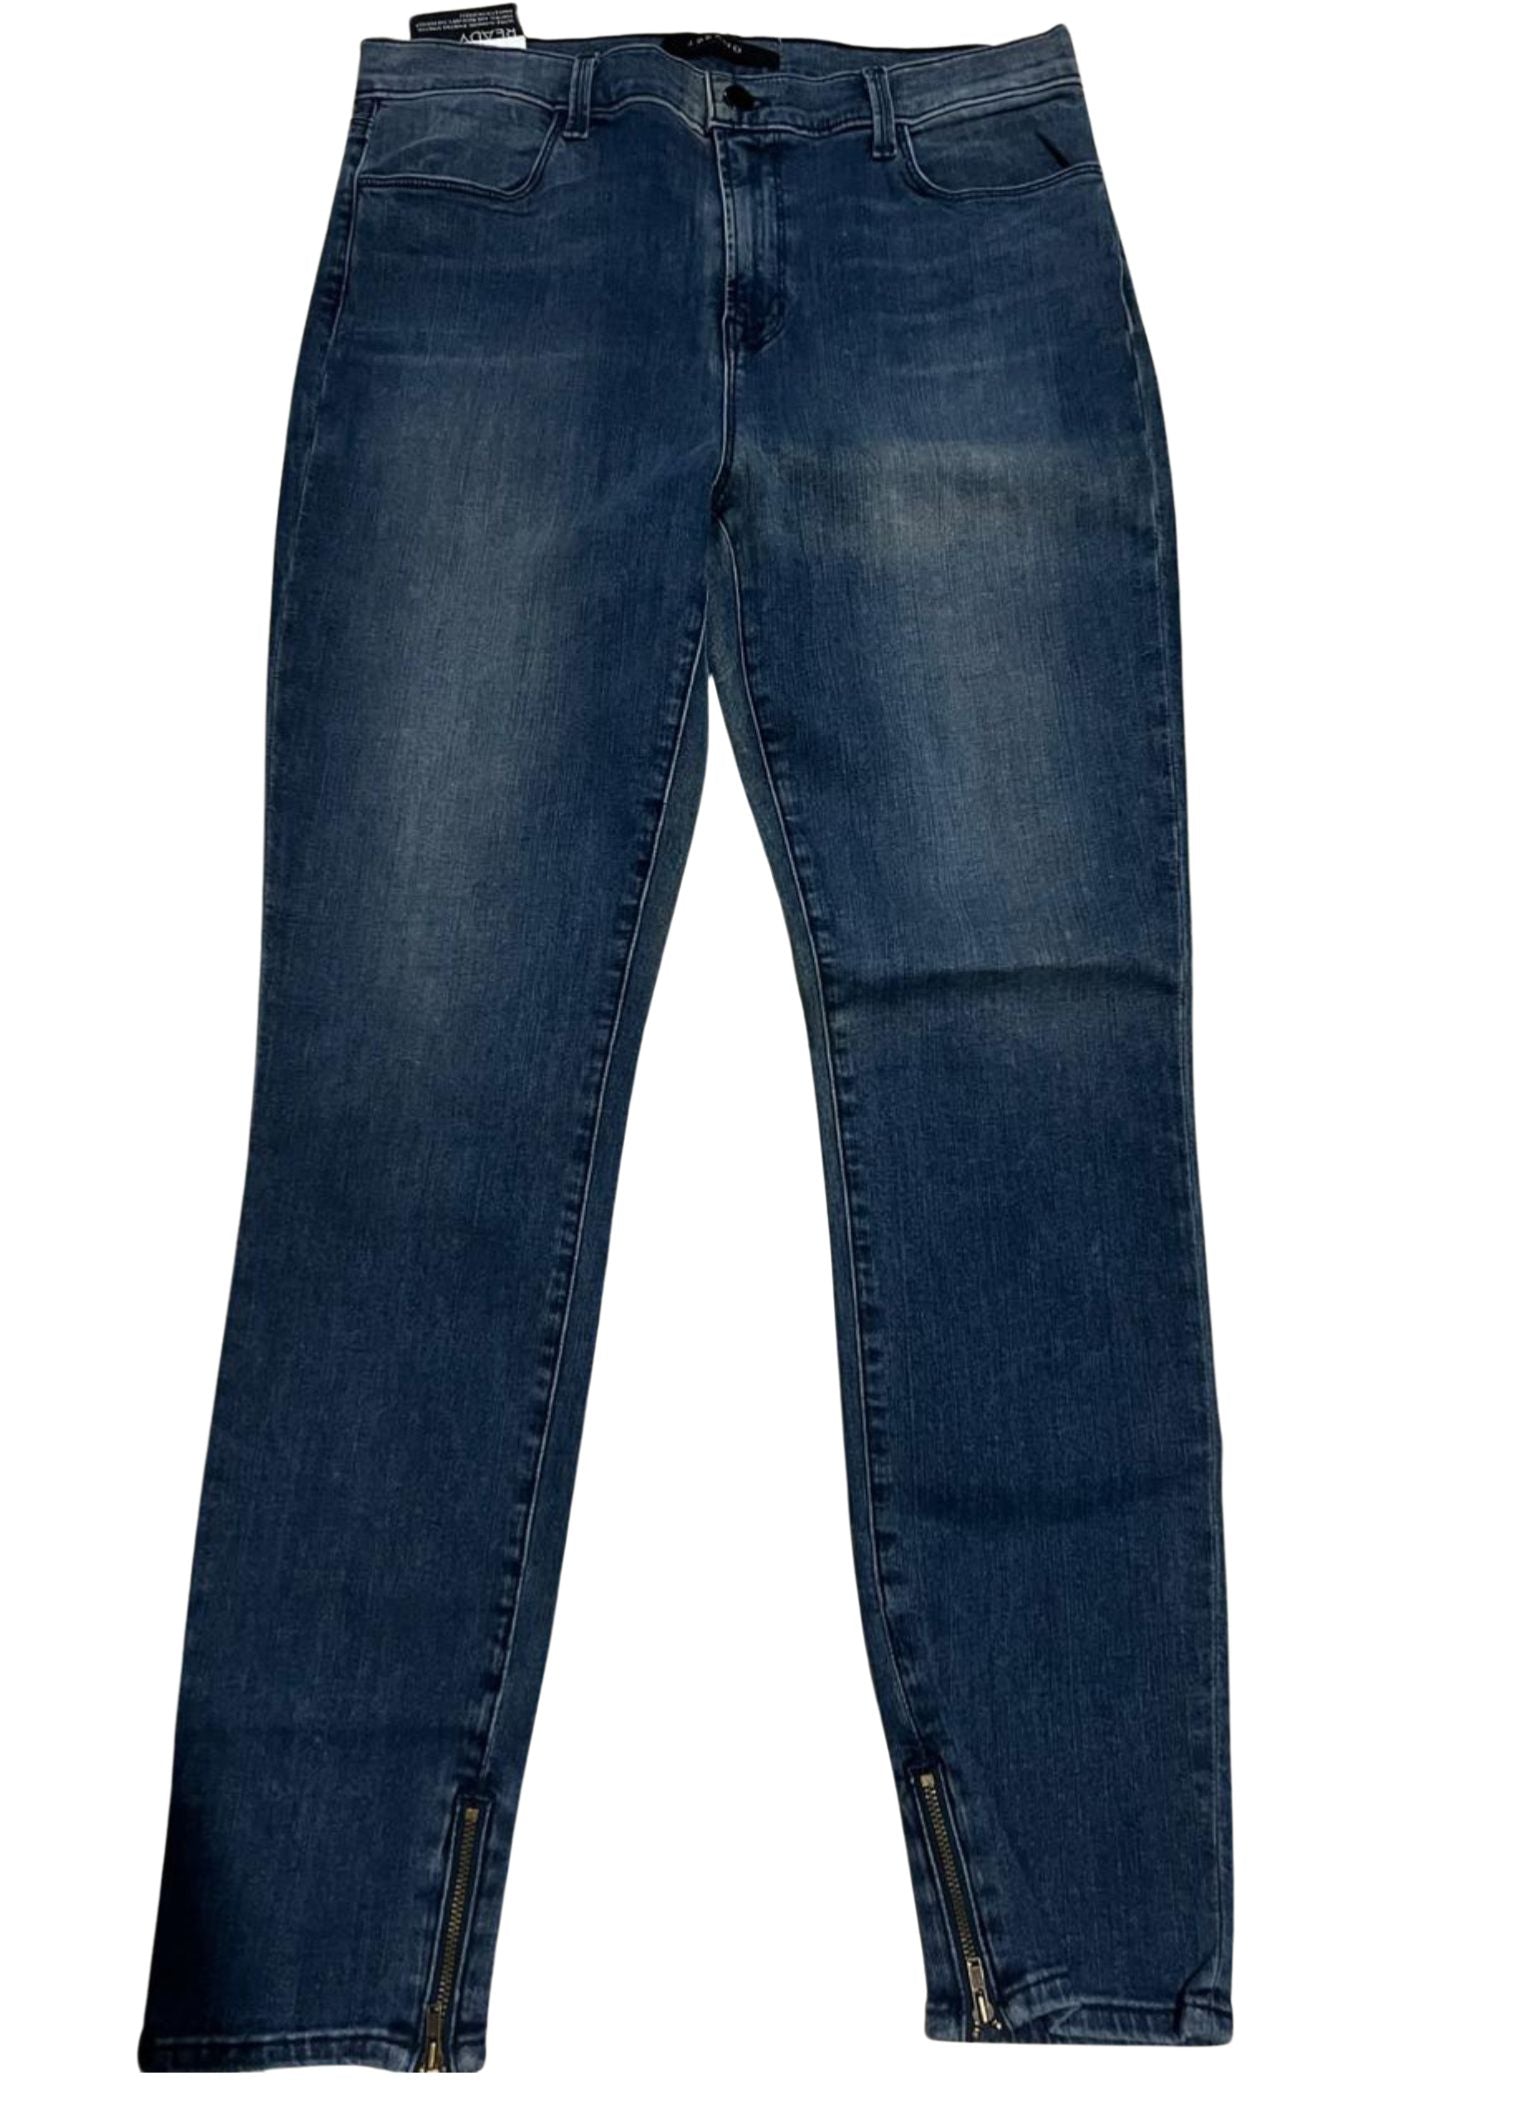 J Brand Jeans - Second Chance